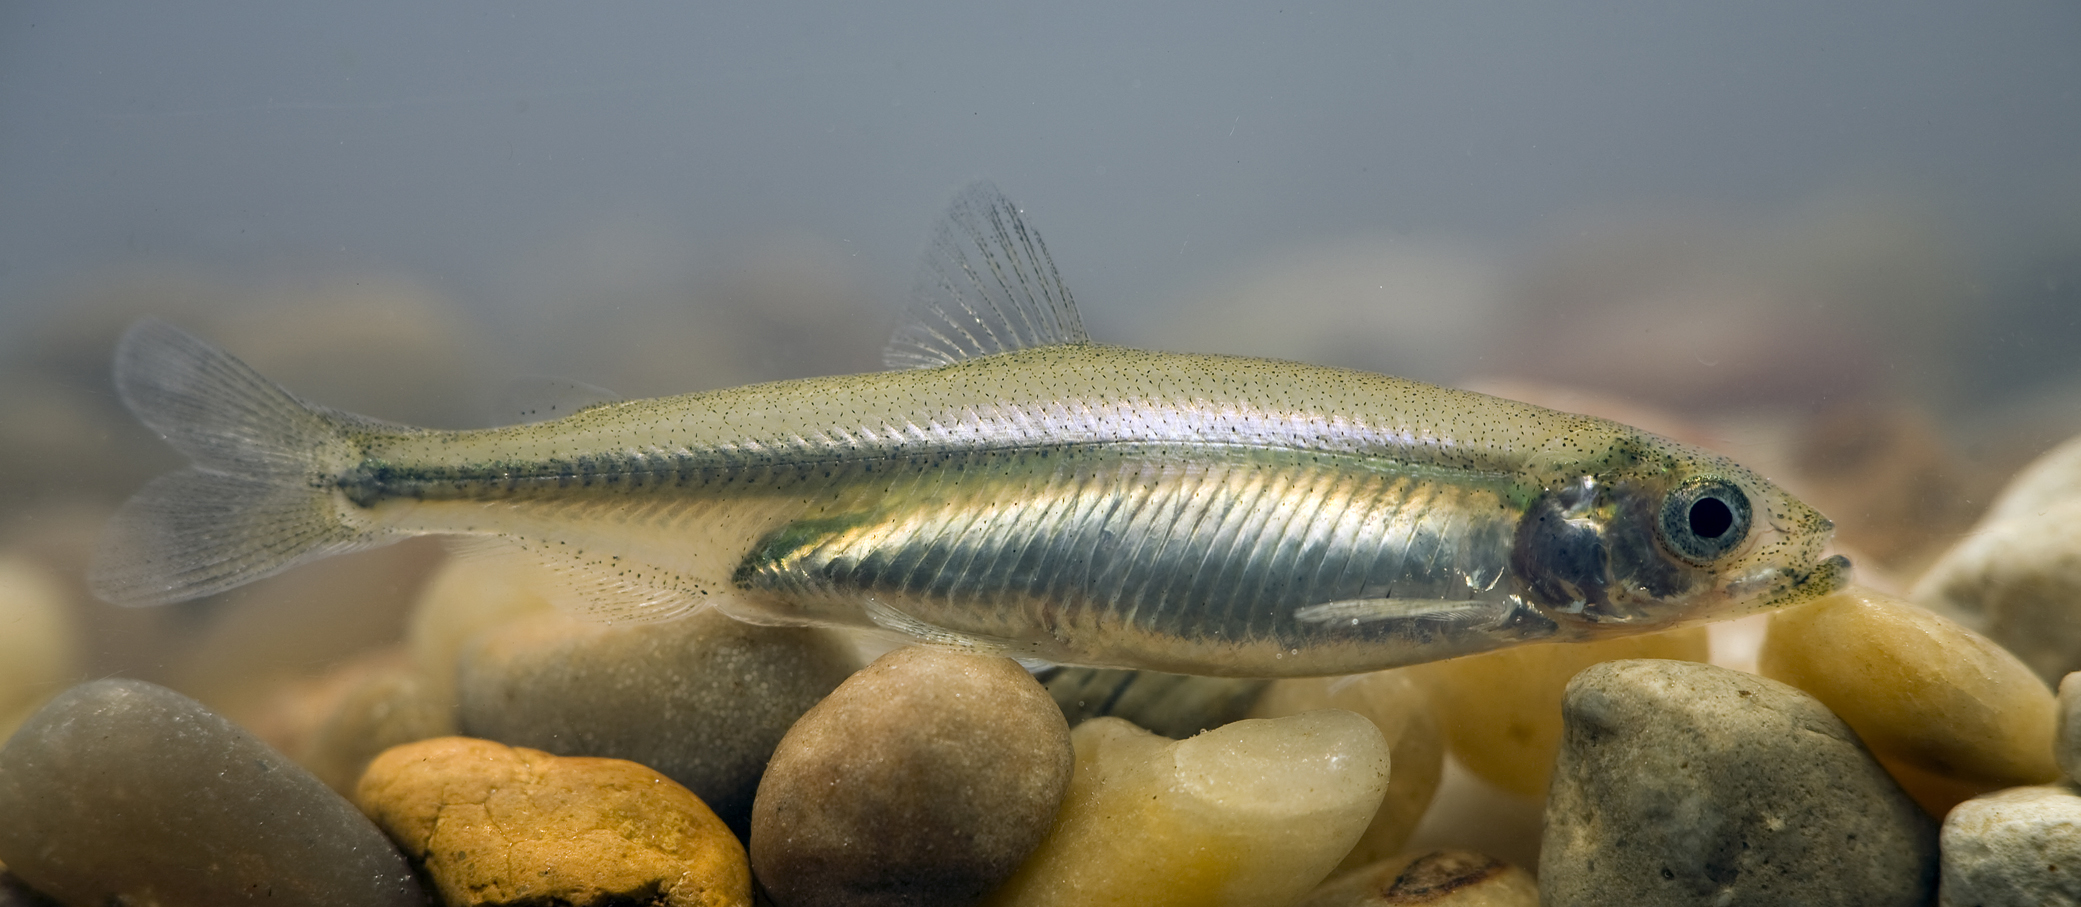 California, drought and the Delta Smelt